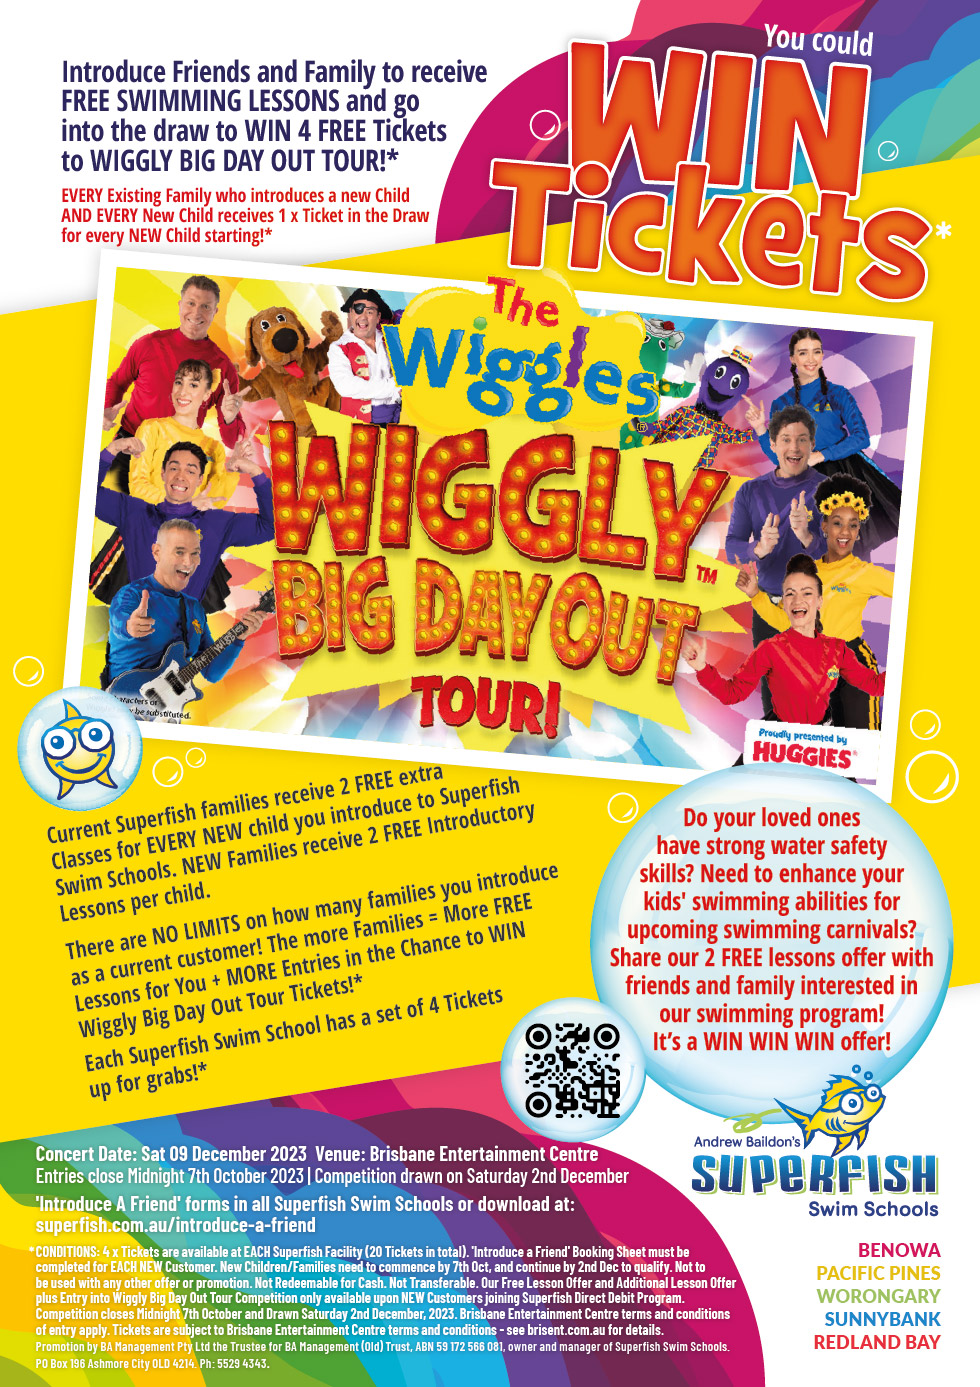 Introduce a friend for your chance to WIN tickets to Wiggly Day Out Concert!*